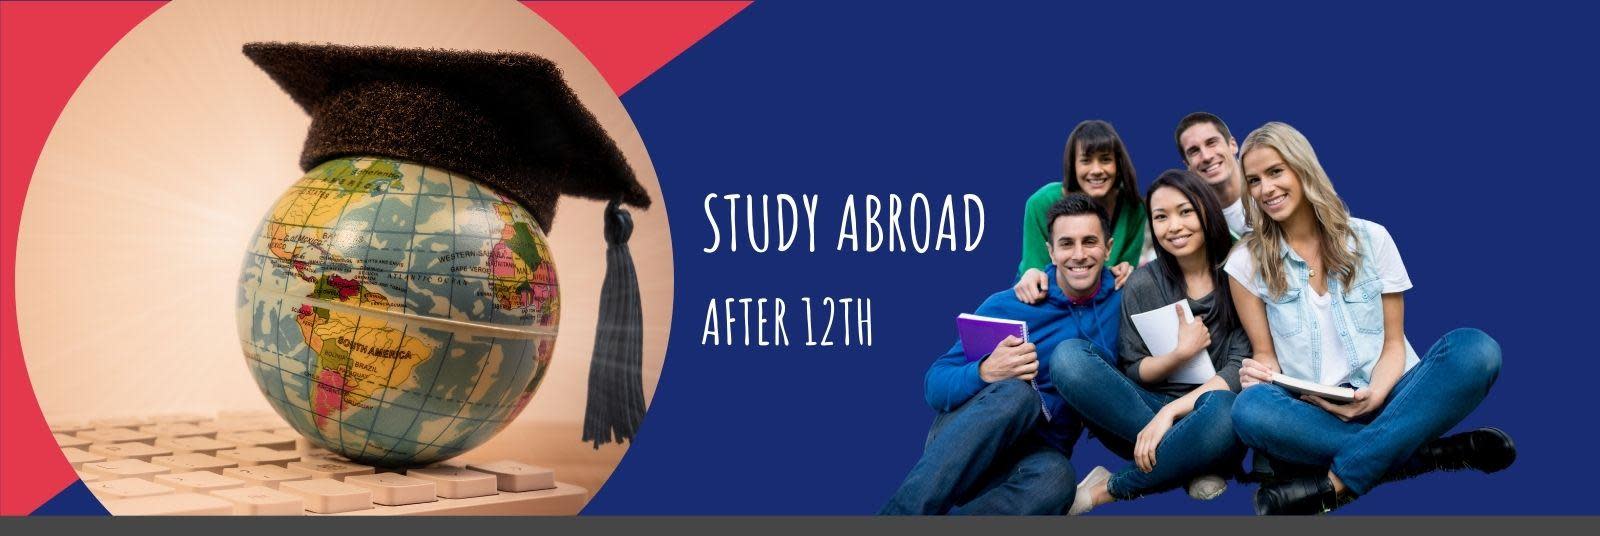 How To Go Abroad For Studies After 12Th From India?